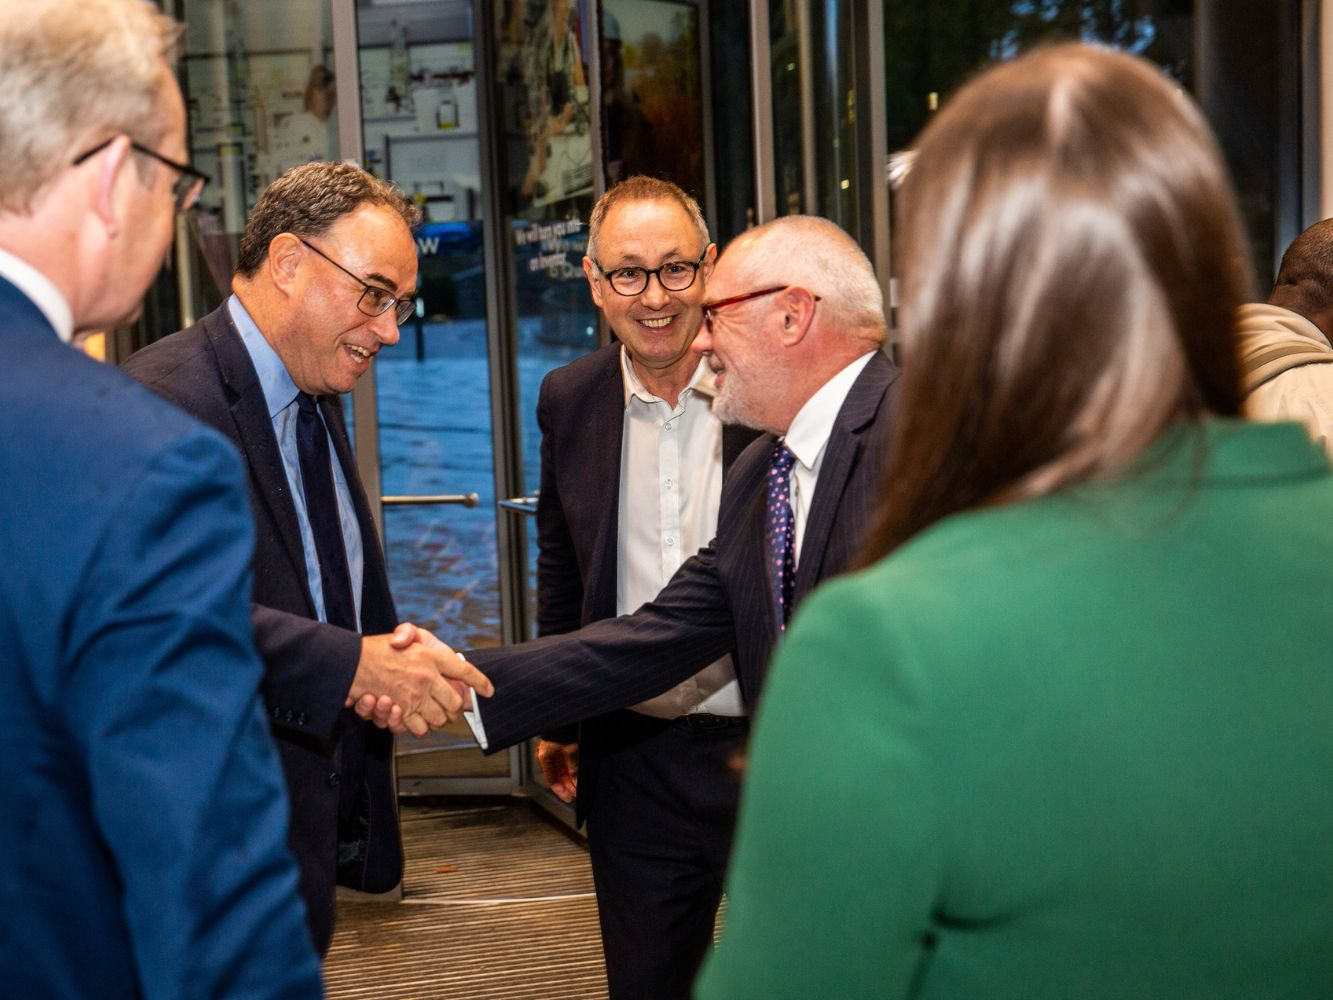 Andrew Bailey shaking the hand of Steve Olivier, with Paul de Leeuw in the background.